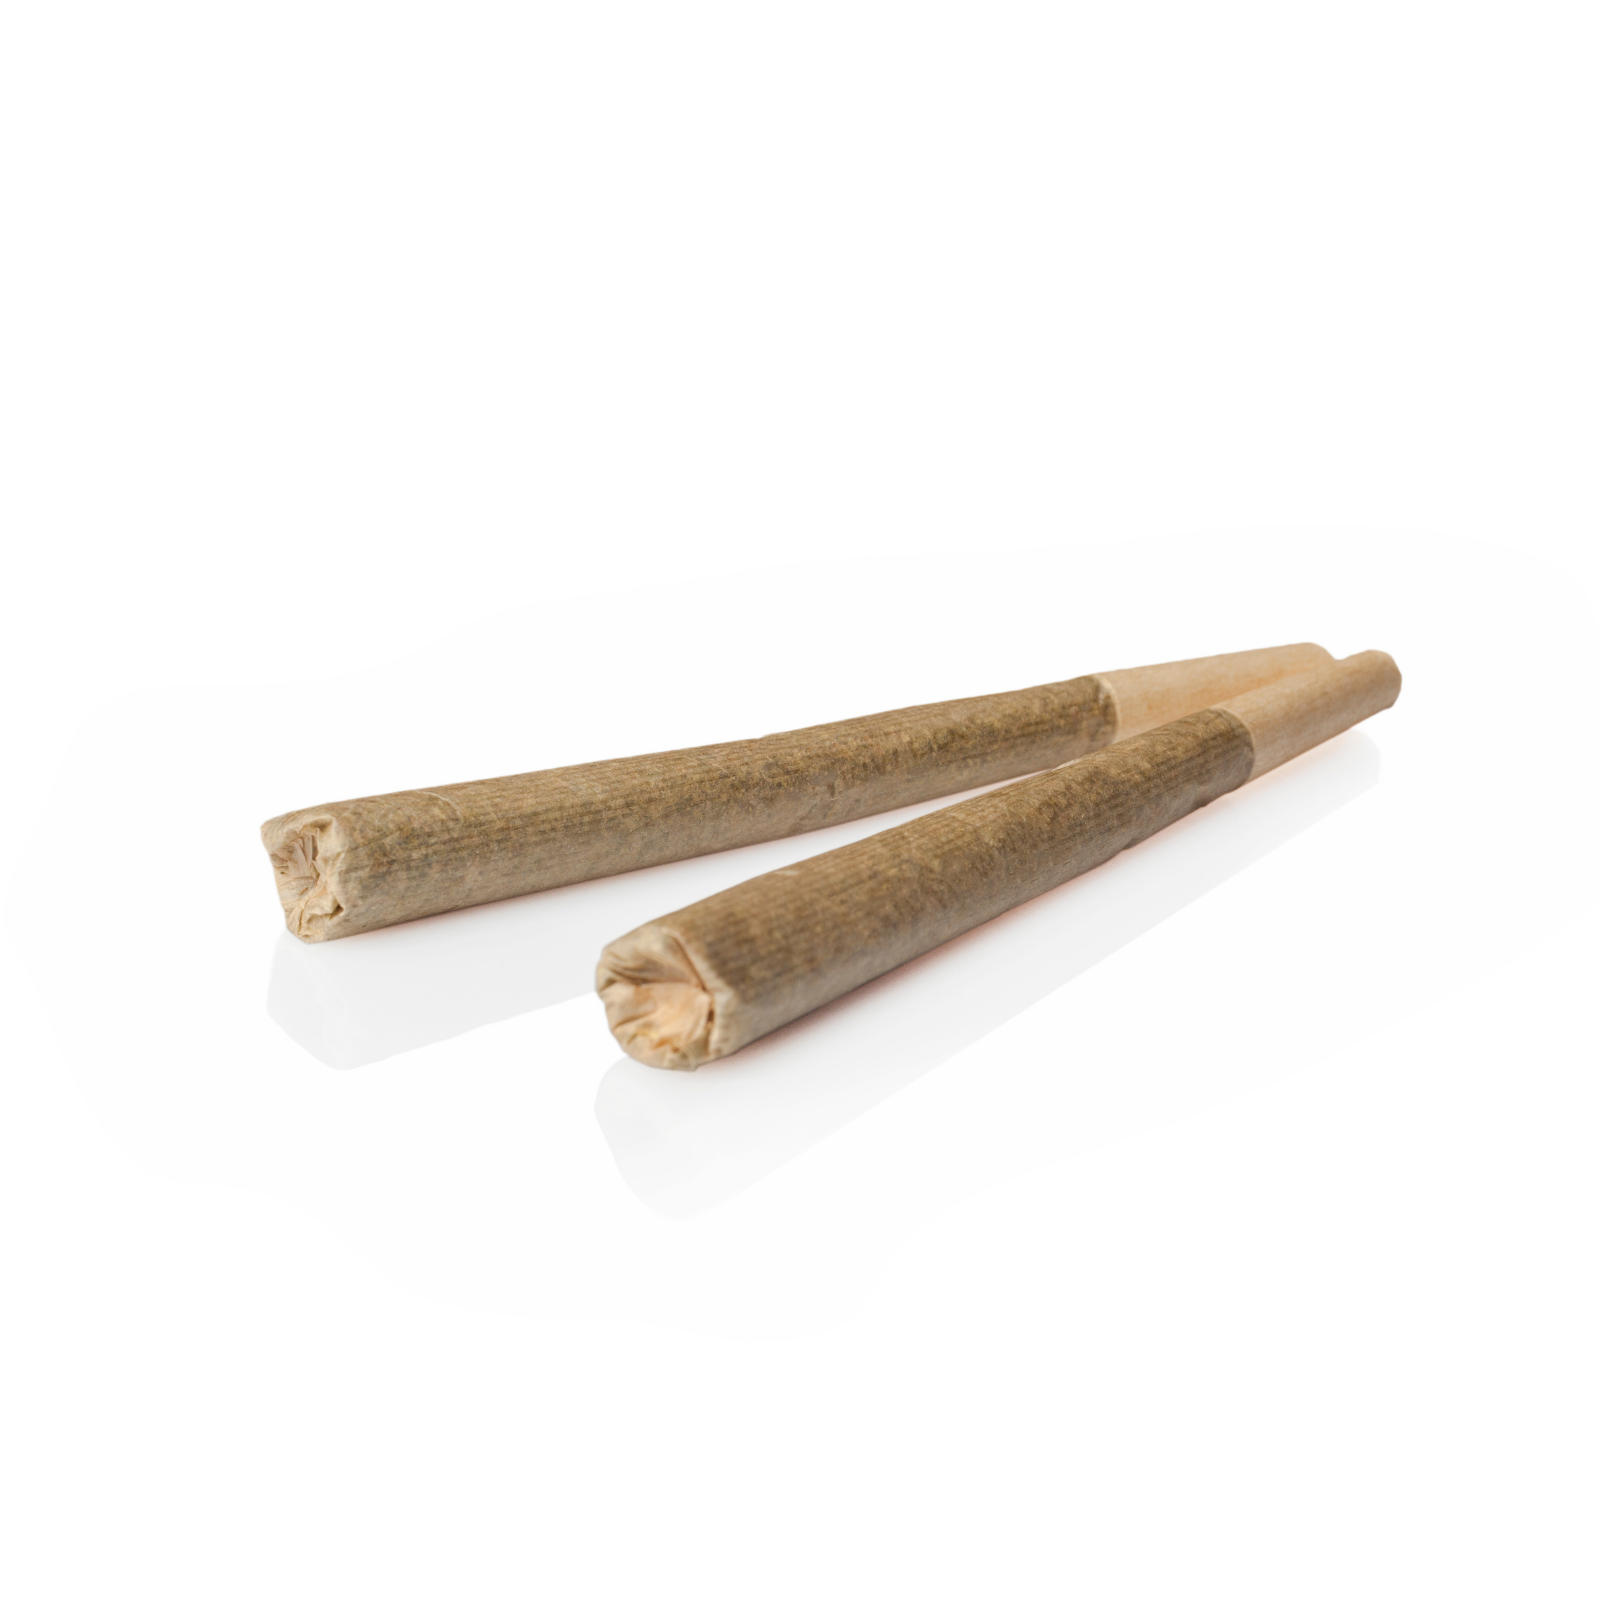 Simply Crafted Free Shipping Save 25 With Code Leafly Mimosa Delta 8 Flower Pre Roll Leafly 6122